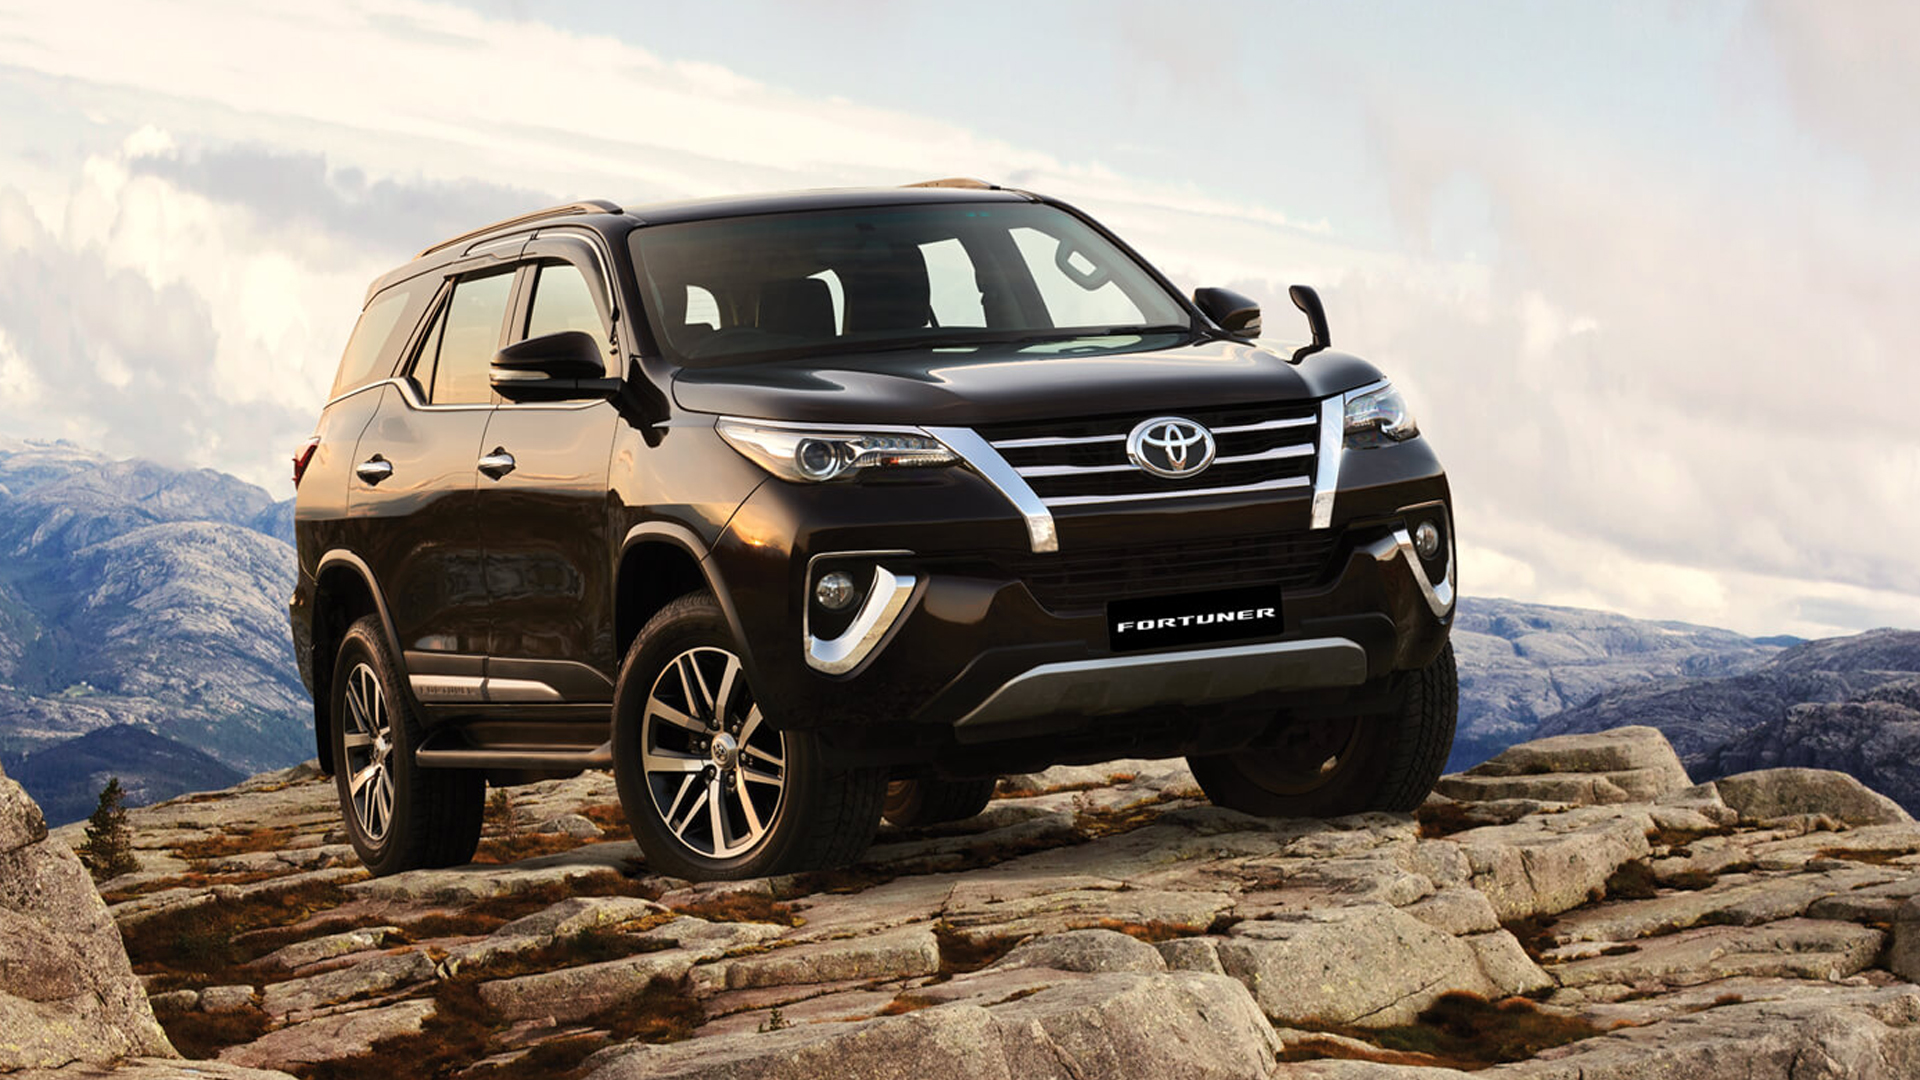 Toyota Fortuner 2020 Price, Mileage, Reviews, Specification, Gallery